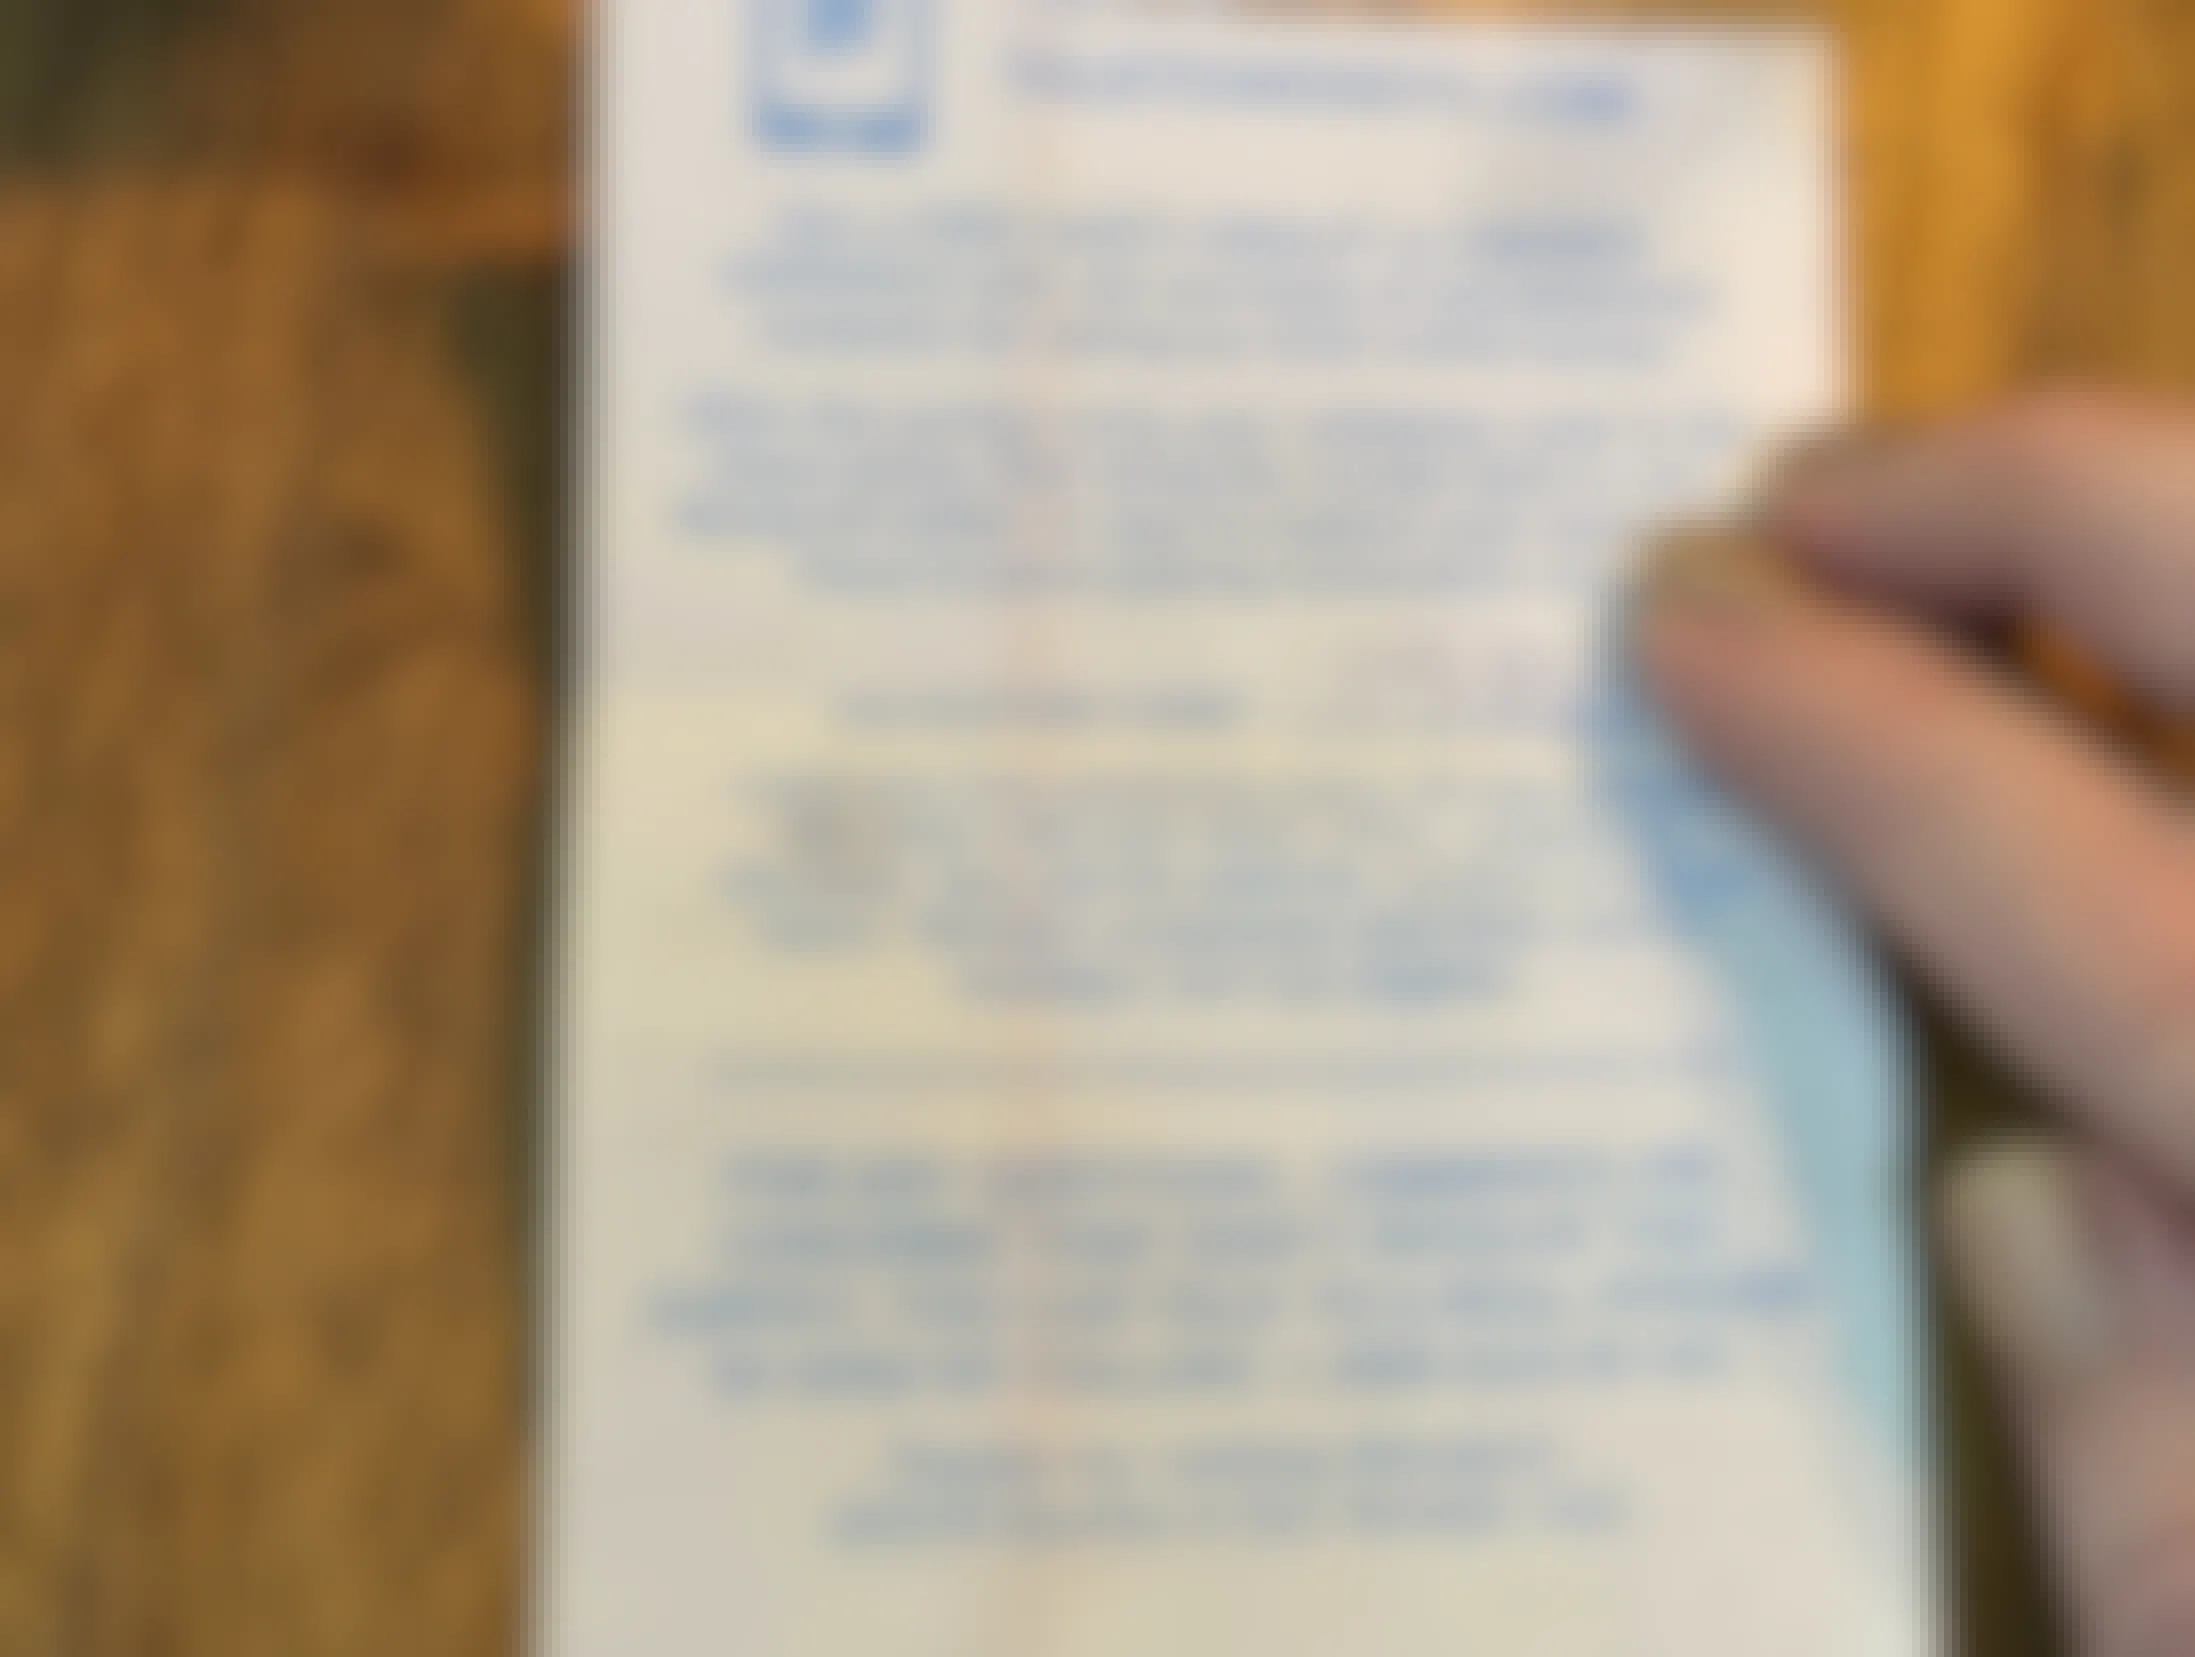 A Wendy's receipt on a table with a person's hand pointing out a handwritten validation code for a survey reward.